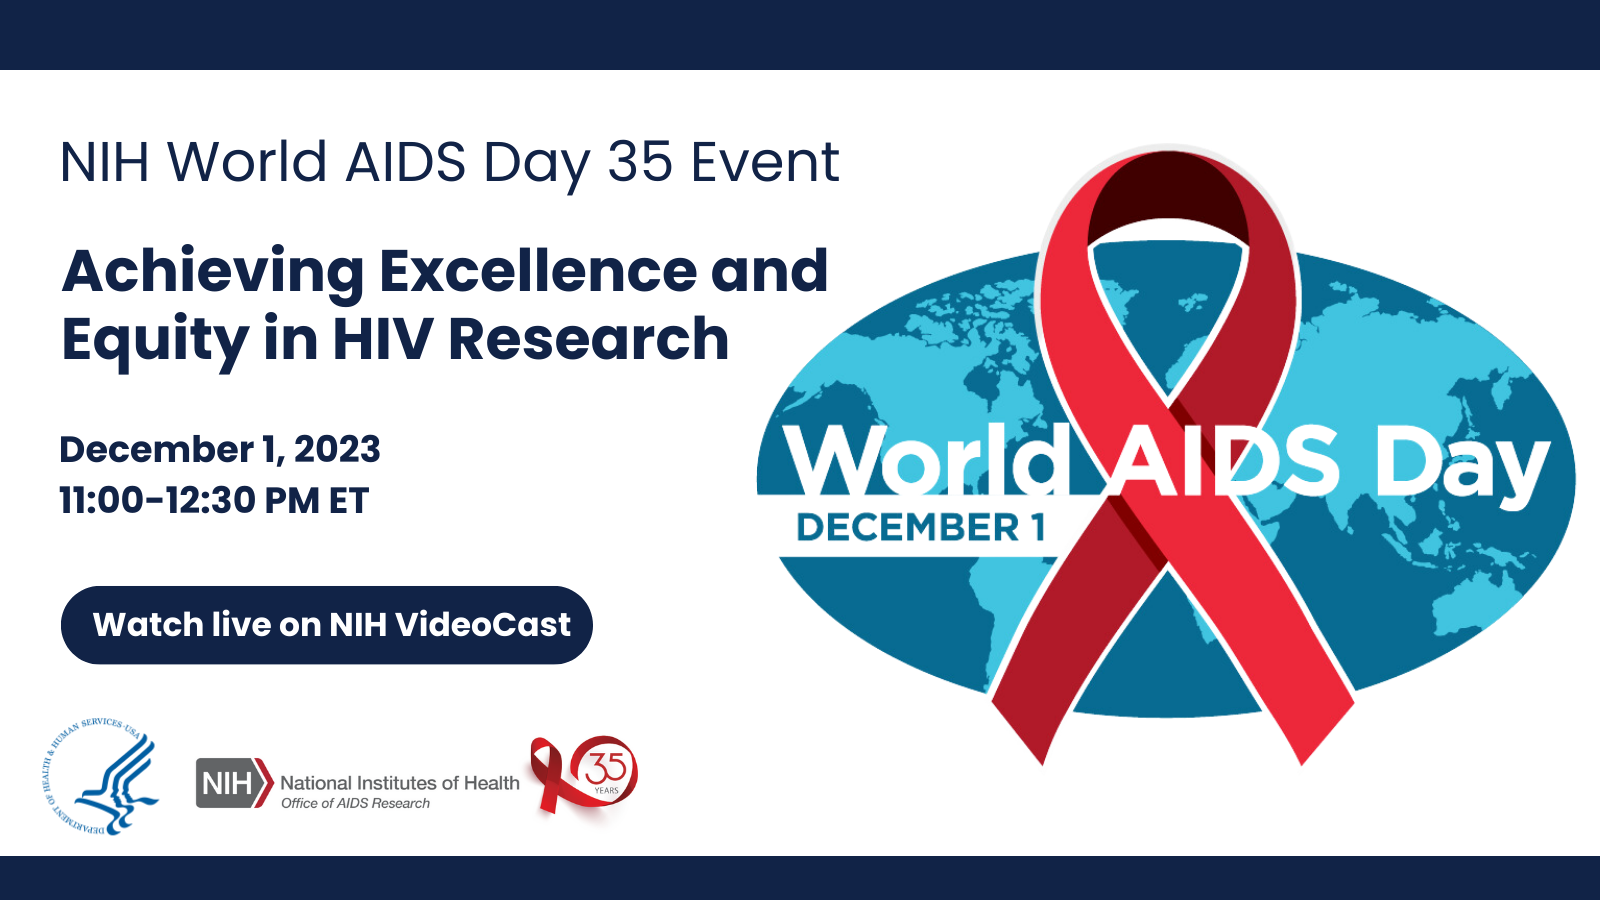 NIH World AIDS Day 35 Event: Achieving Excellence and Equity in HIV Research World AIDS Day - December 1, 2023December 1, 2023  11:00 a.m. – 12:30 p.m. ET  Broadcast Live on NIH VideoCast.